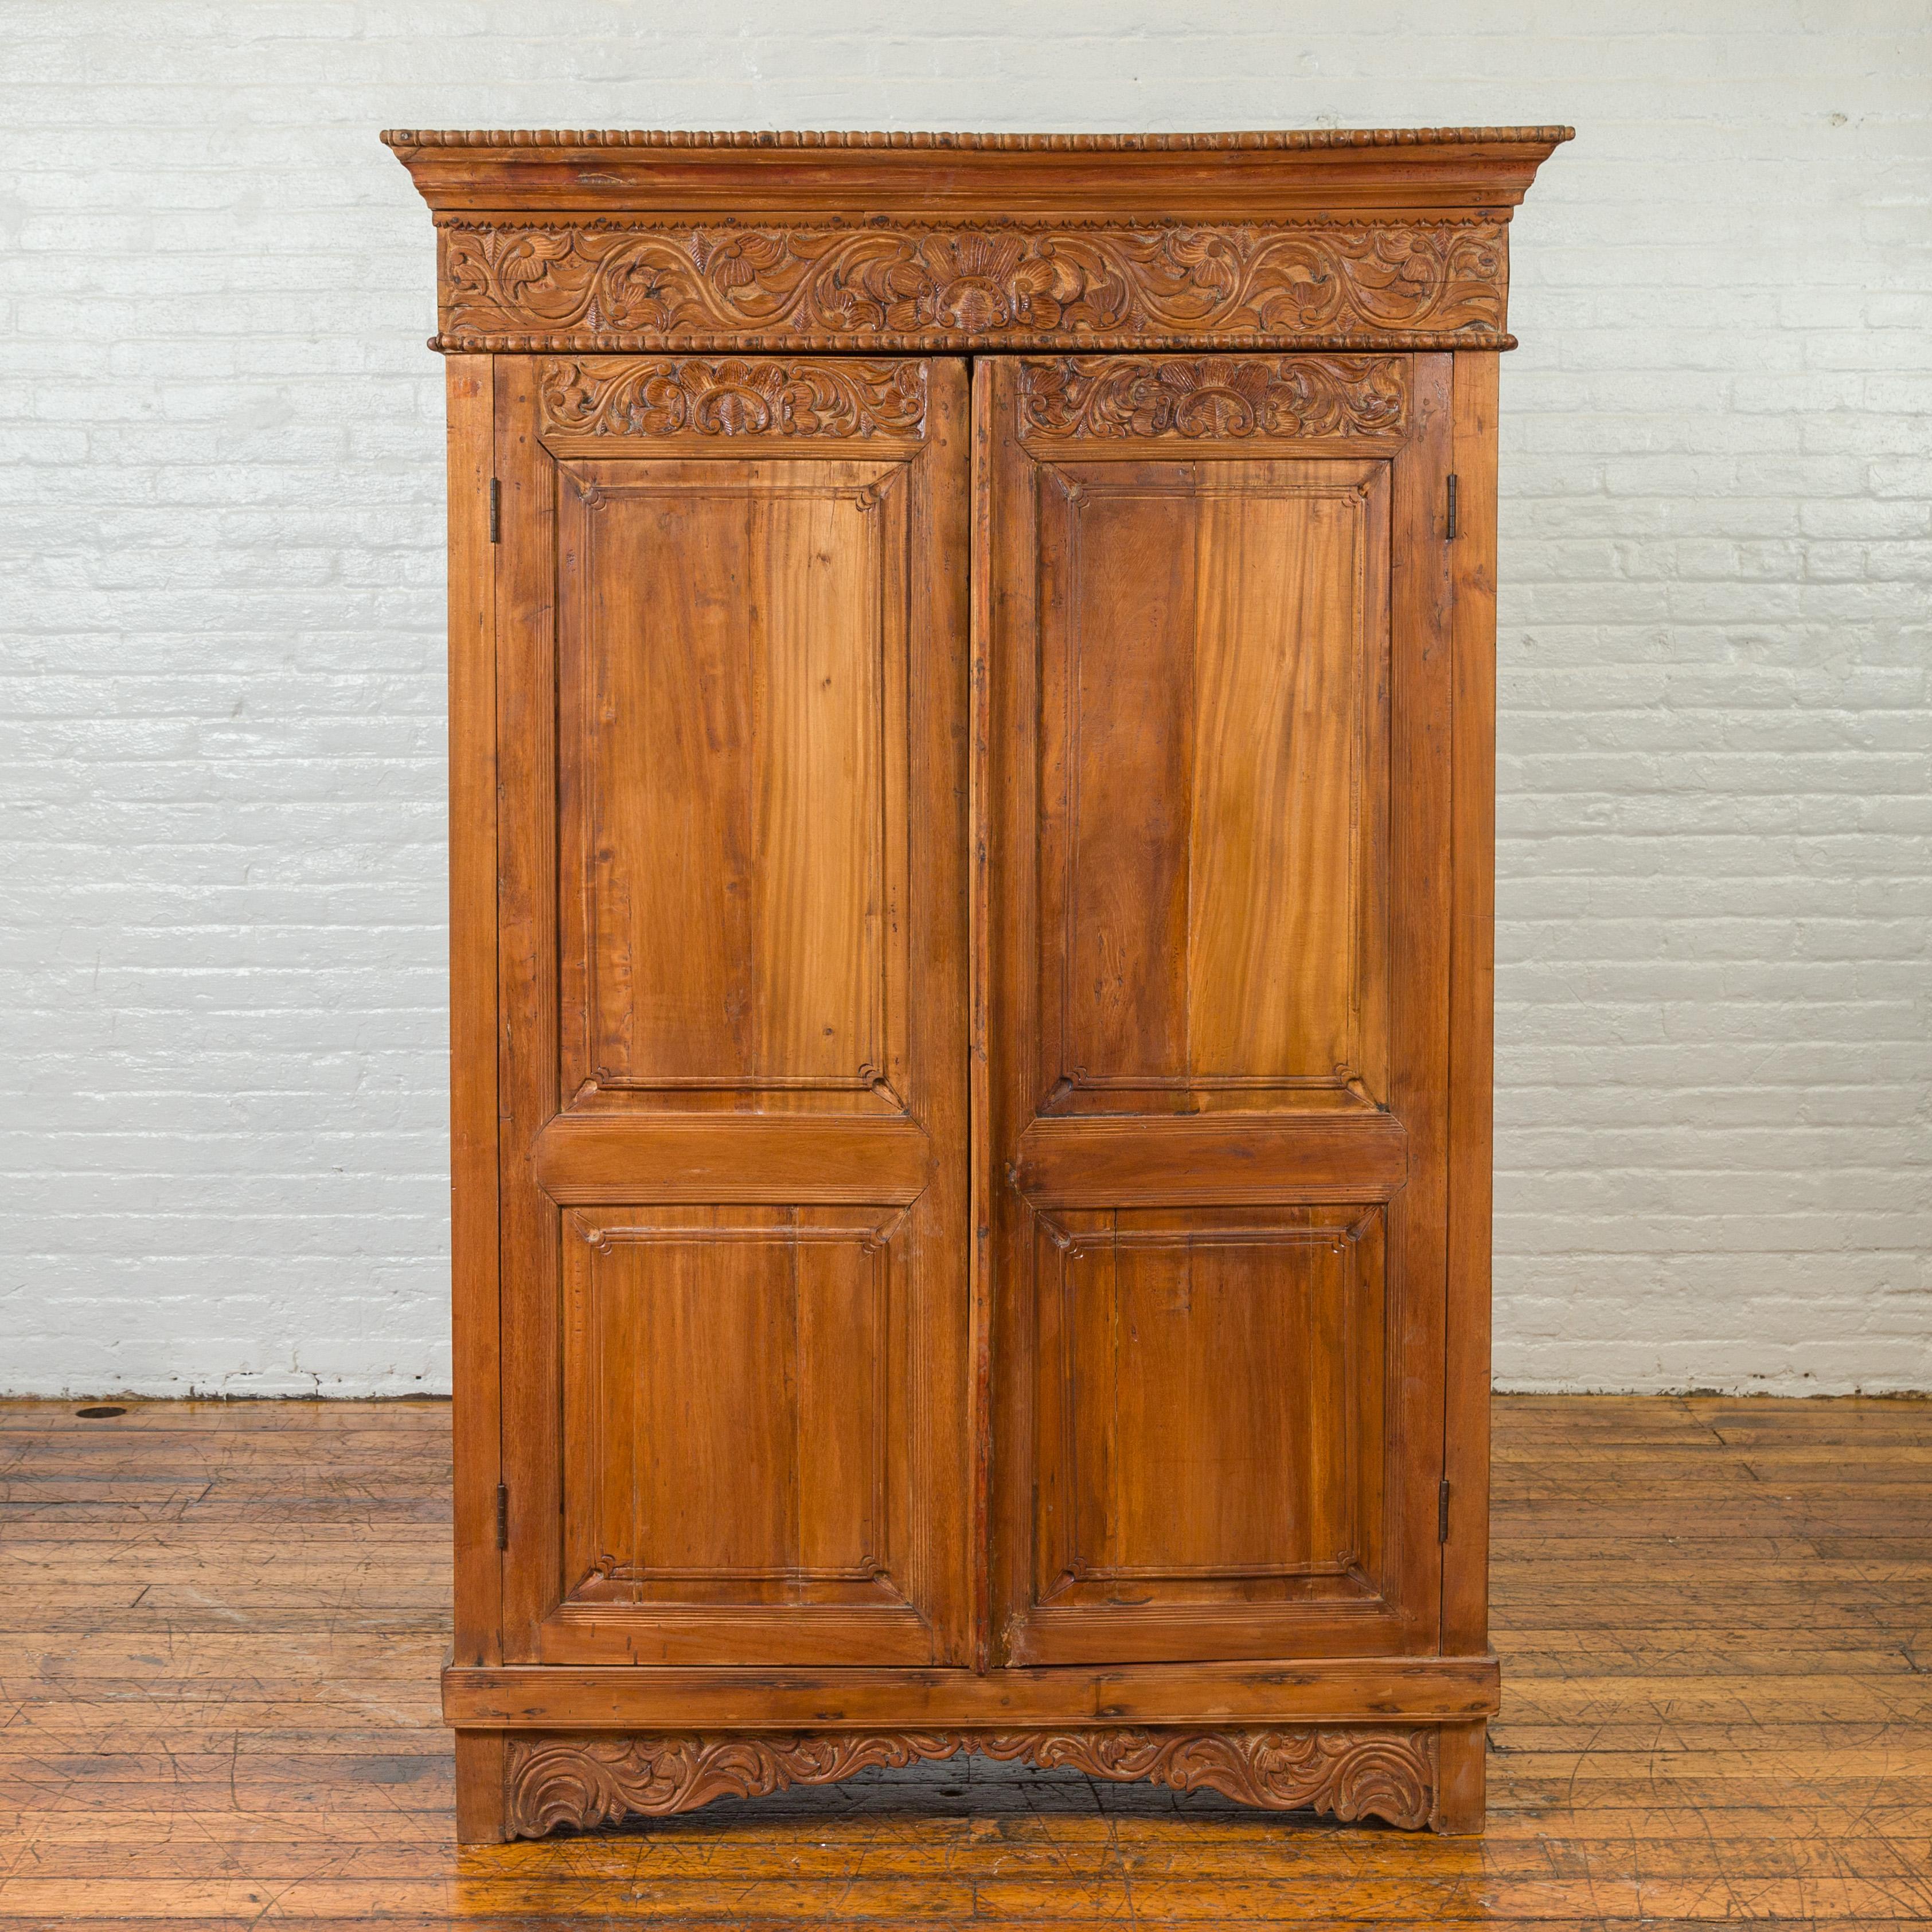 An Indian carved wooden tall cabinet from the 19th century, with scrolling foliage and beaded accents. Crafted in India during the 19th century, this tall cabinet captivates us with its warm patina and delicately carved motifs. A cornice, adorned